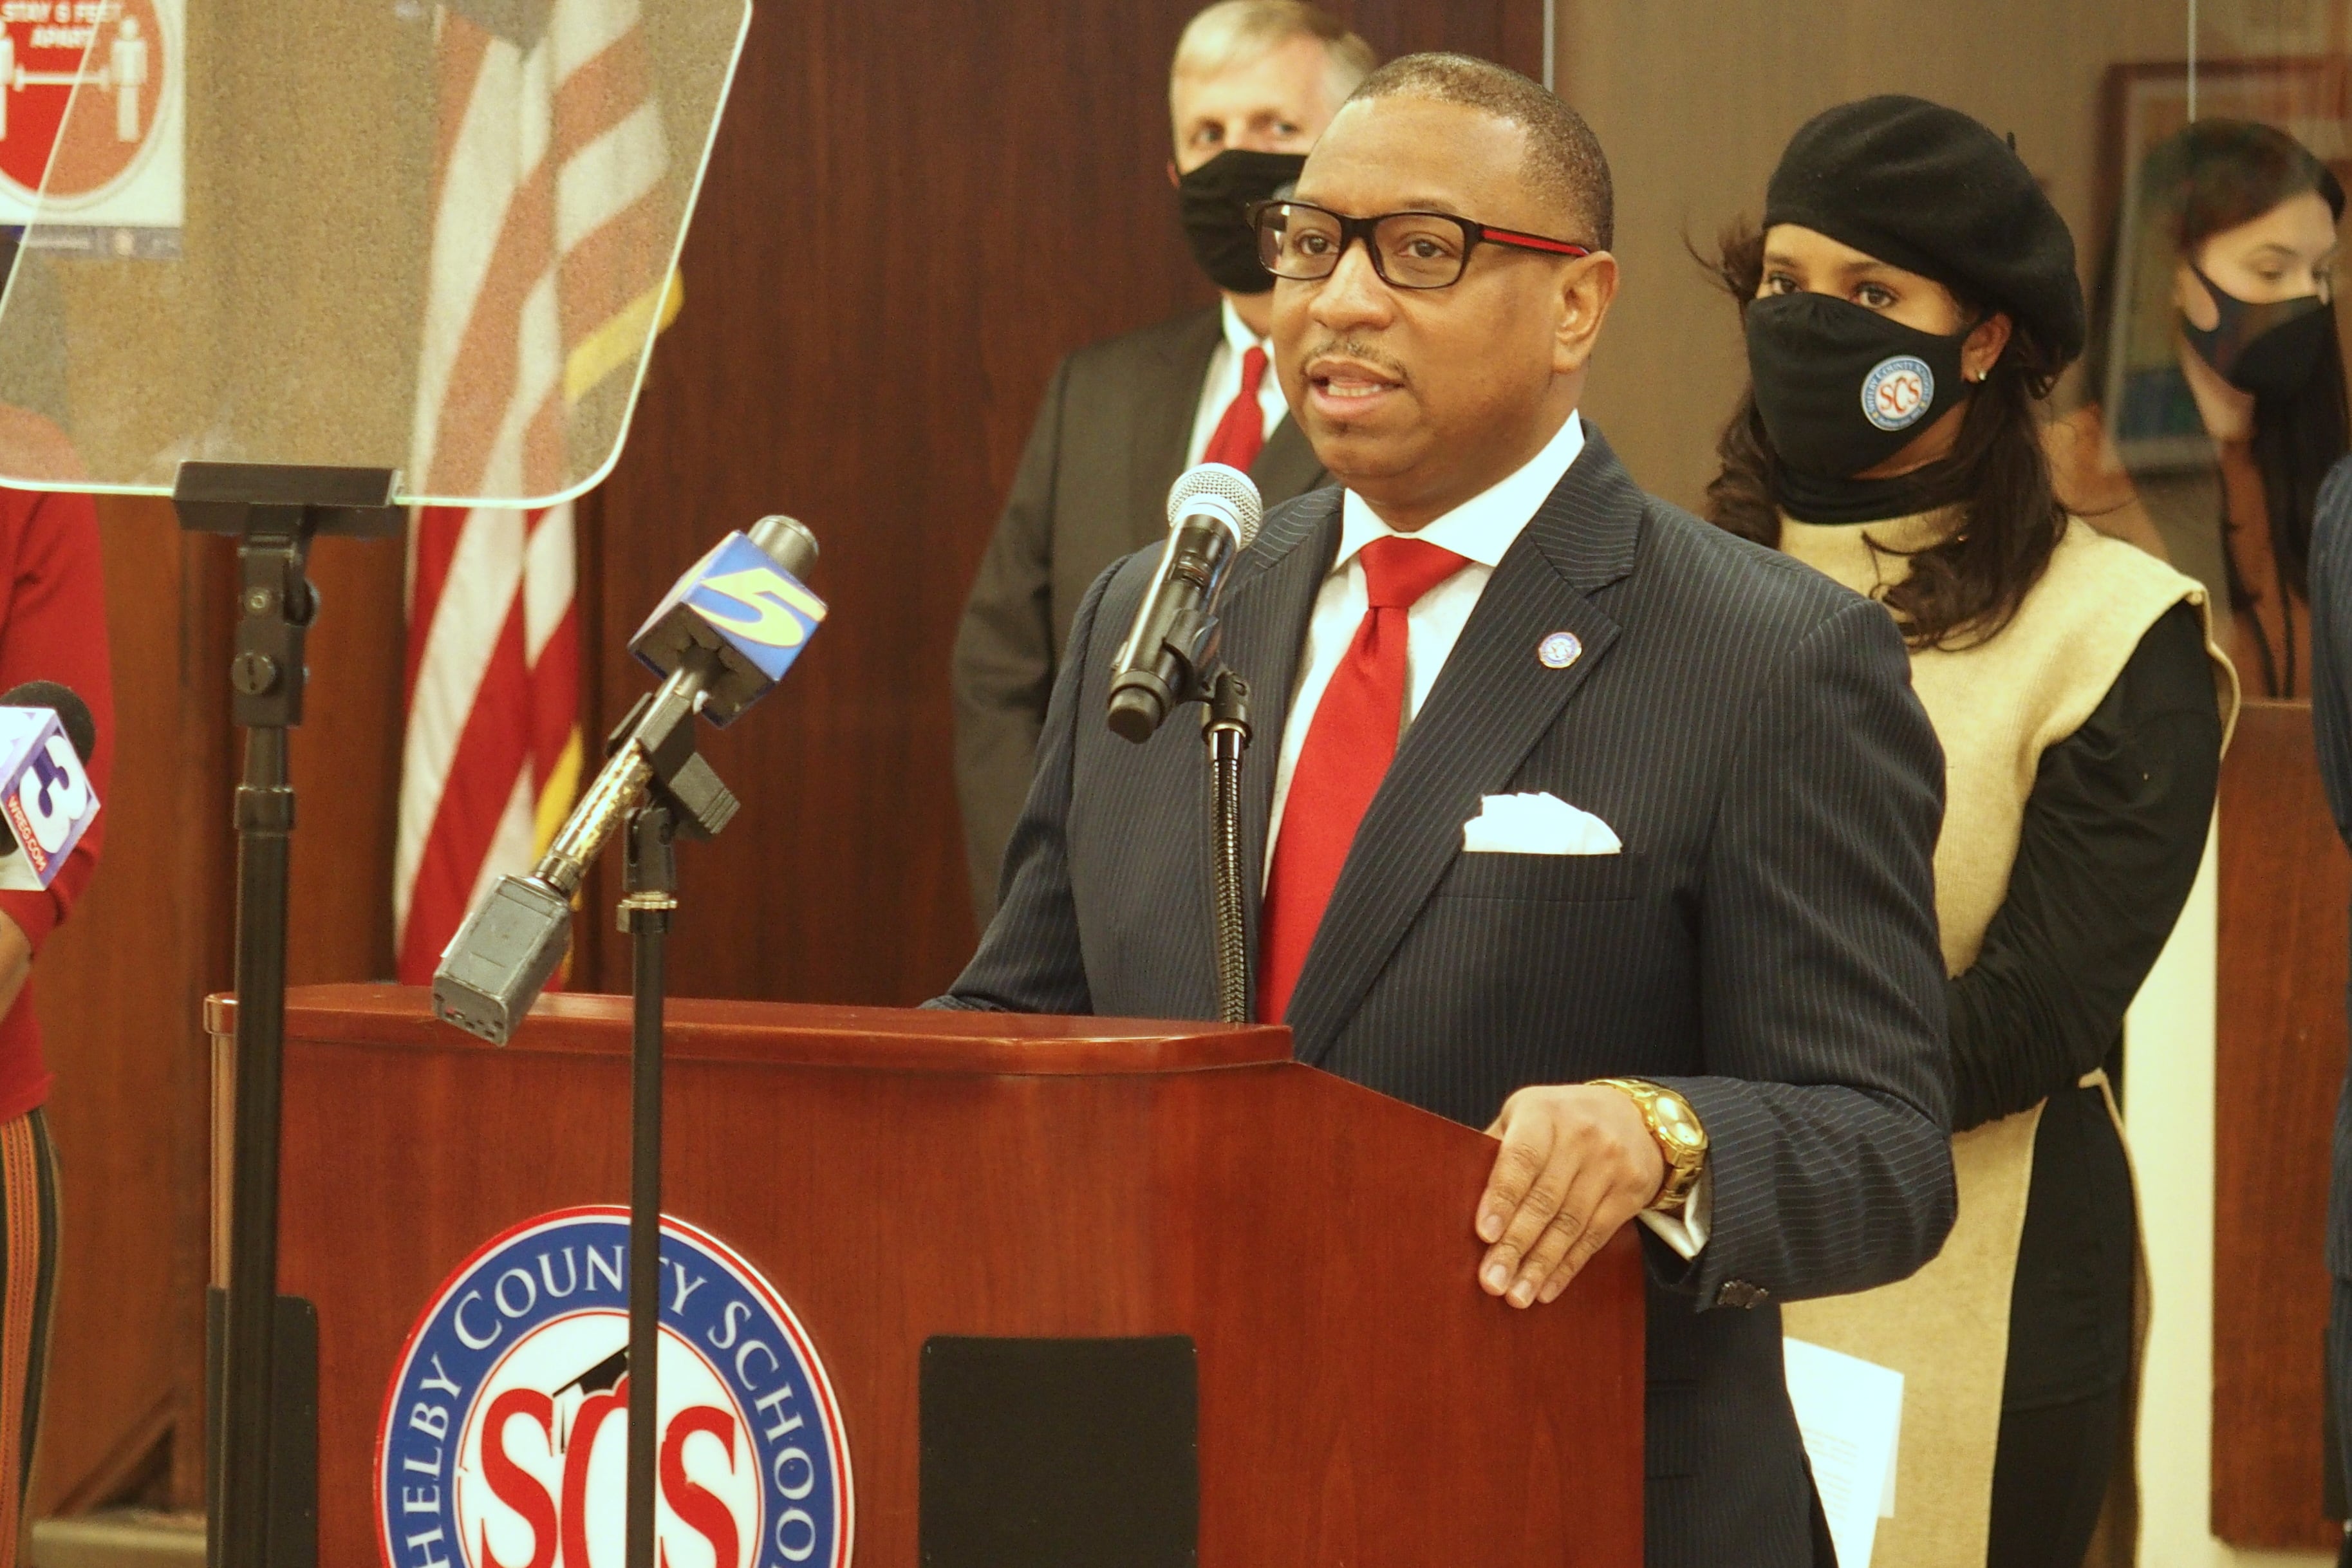 Superintendent Joris Ray stands at a podium with microphones during a press conference as school board chairwoman Miska Clay Bibbs, wearing a mask, looks on from behind.